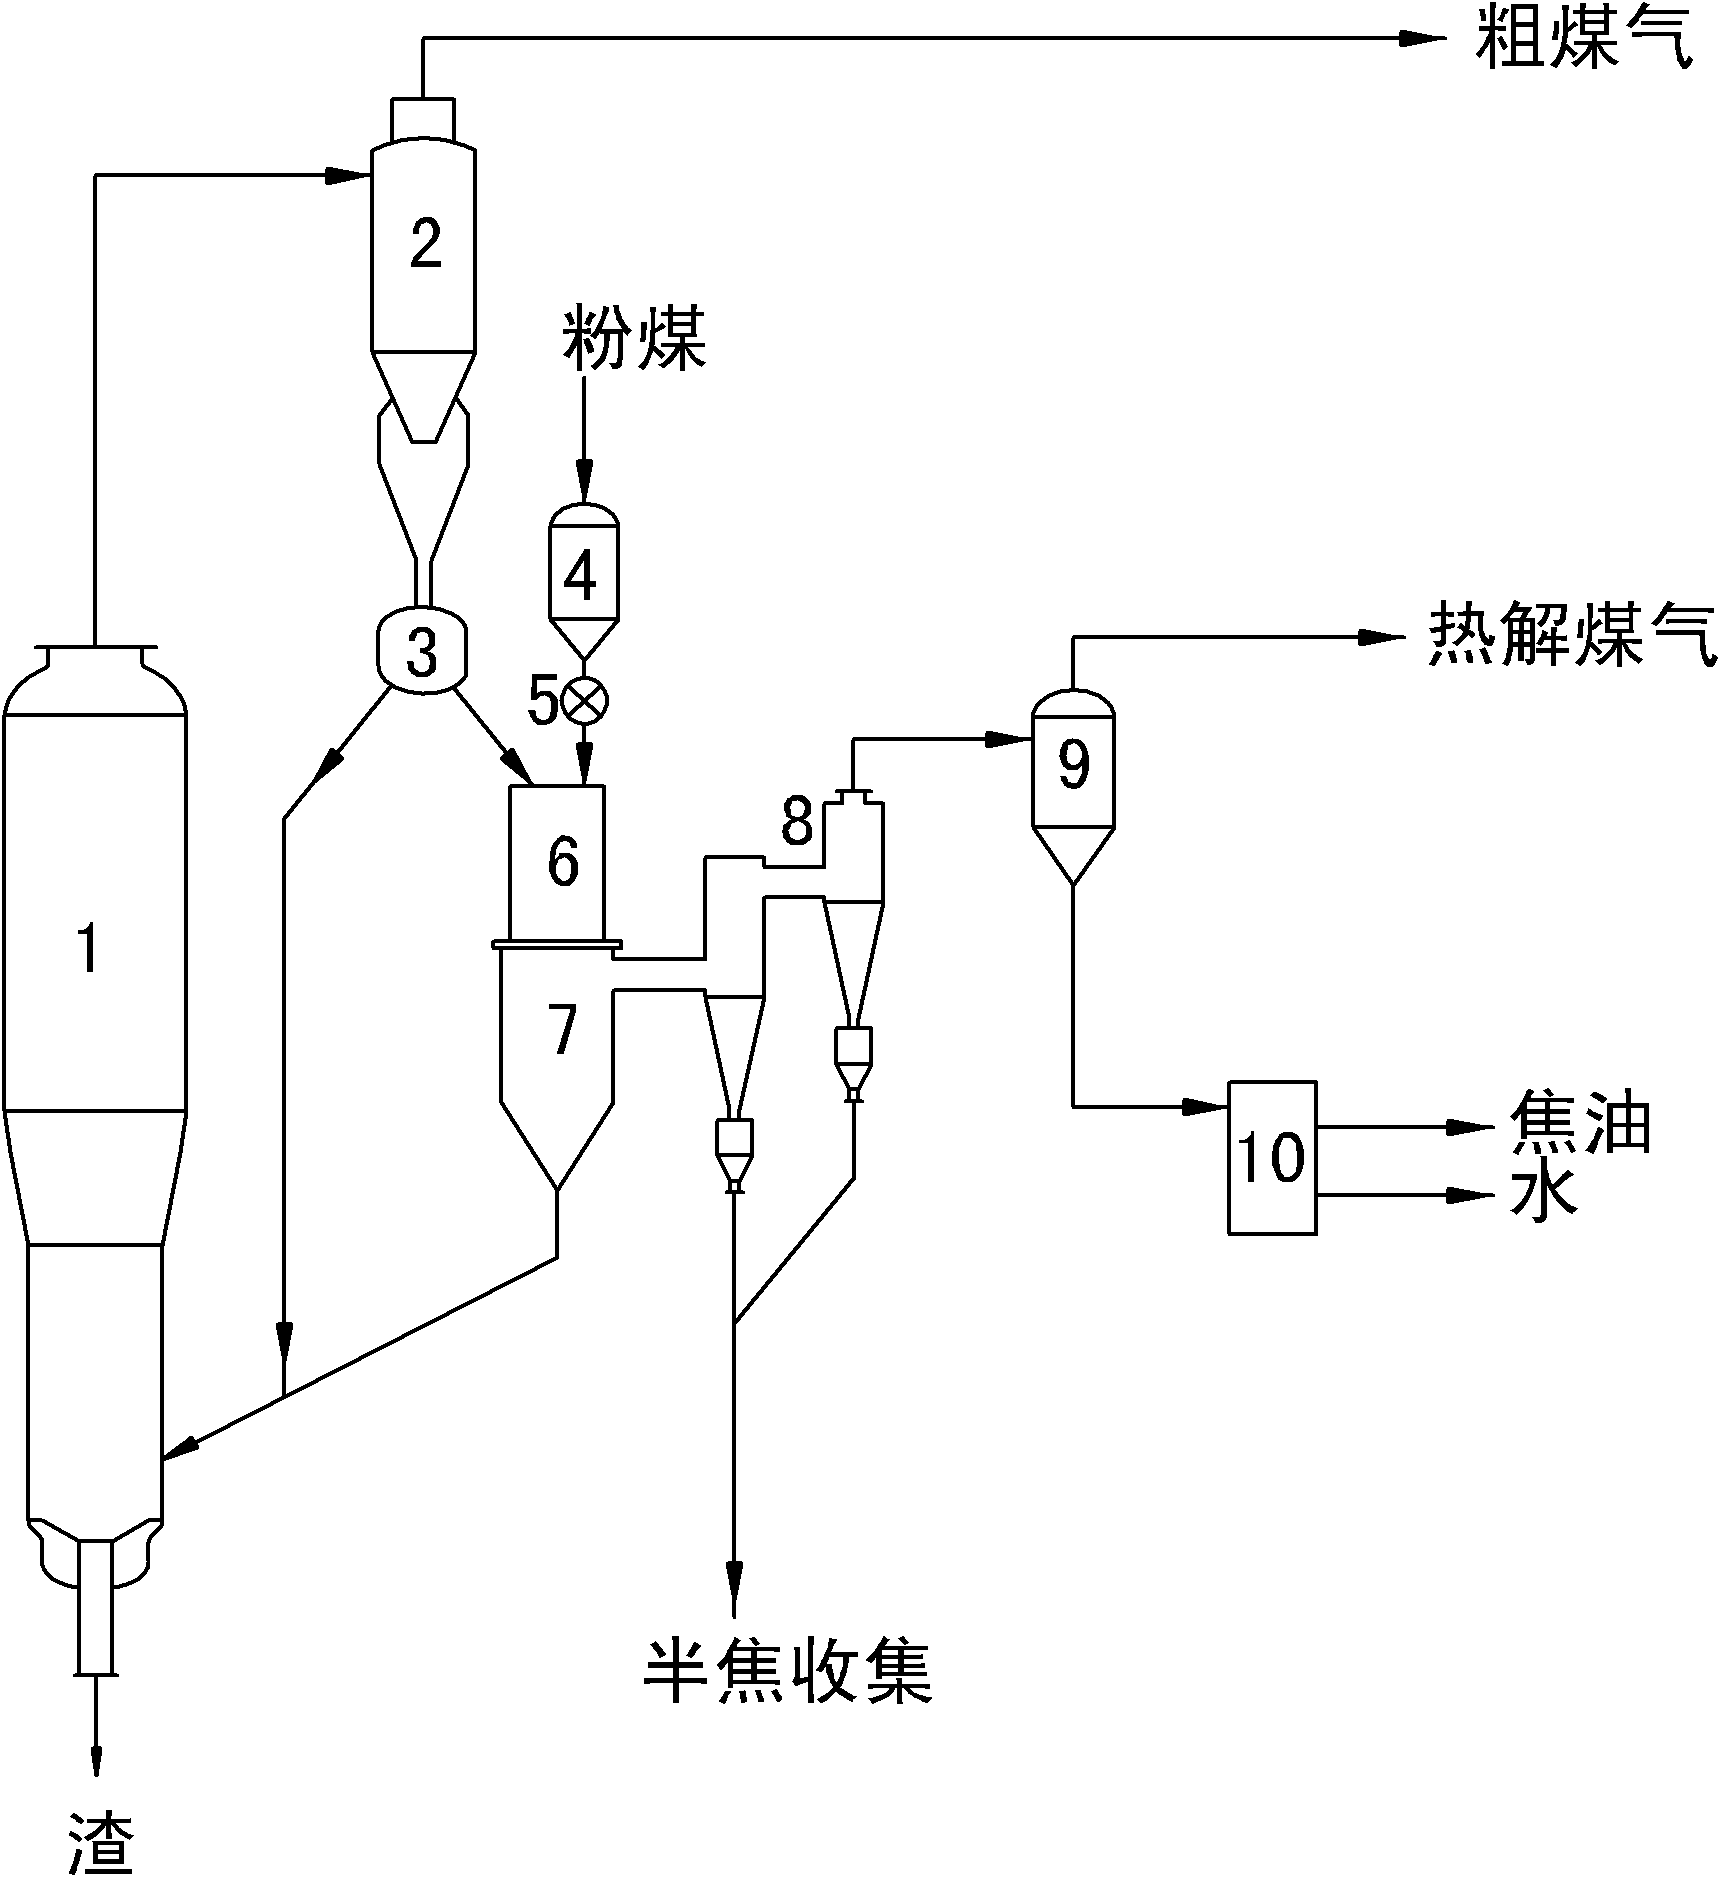 Air-oil co-production device and method adopting fluidized bed pulverized coal gasification and solid heat carrier pyrolysis coupling